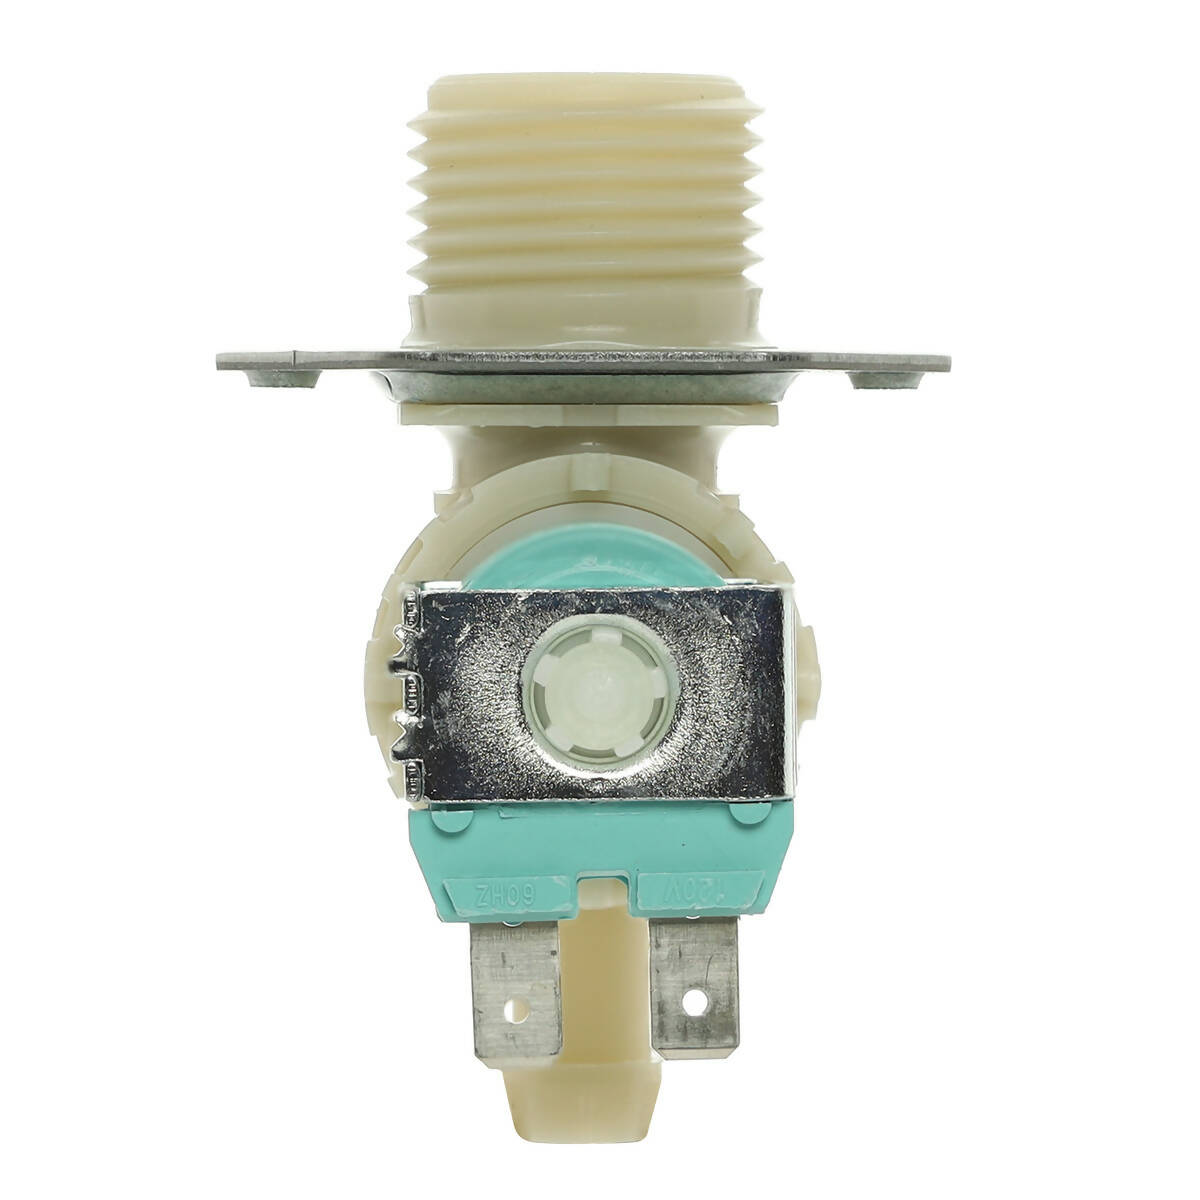 LG Washer Hot Water Inlet Valve - 5220FR2006H, Replaces: 5220FR2006L 5220FR2006Q 1268123 AP4441935 PS3527427 EAP3527427 PD00001765